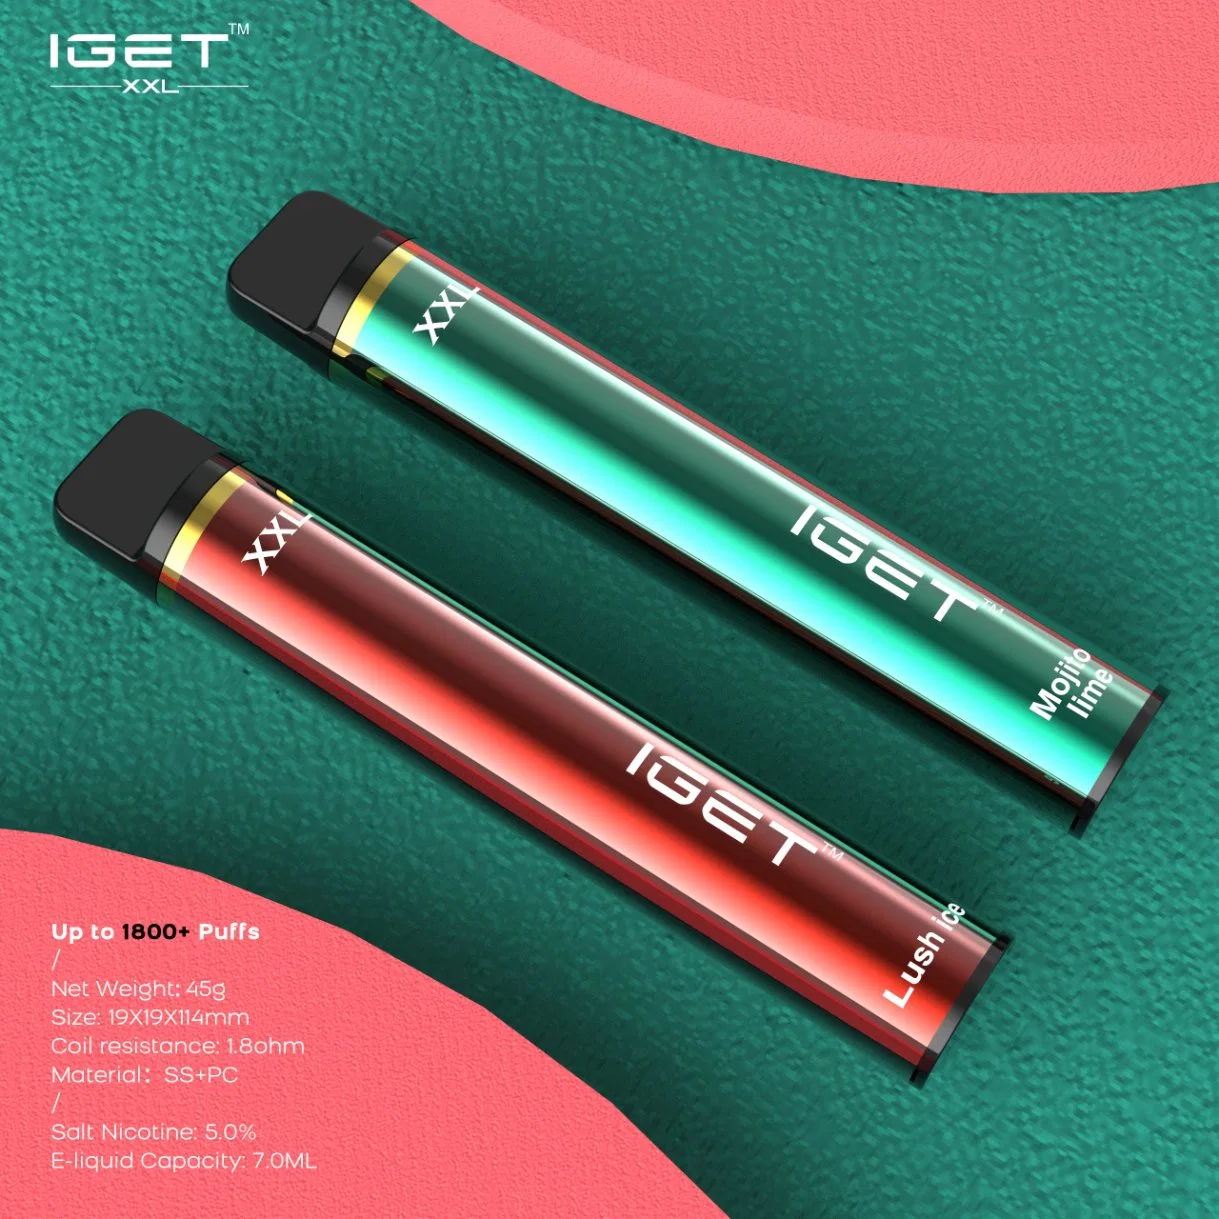 Iget XXL Disposable/Chargeable Pod Device Vape Pen Kit Battery 1800puffs Pre-Filled Vapors Portable System Starter Kit Iget Shion